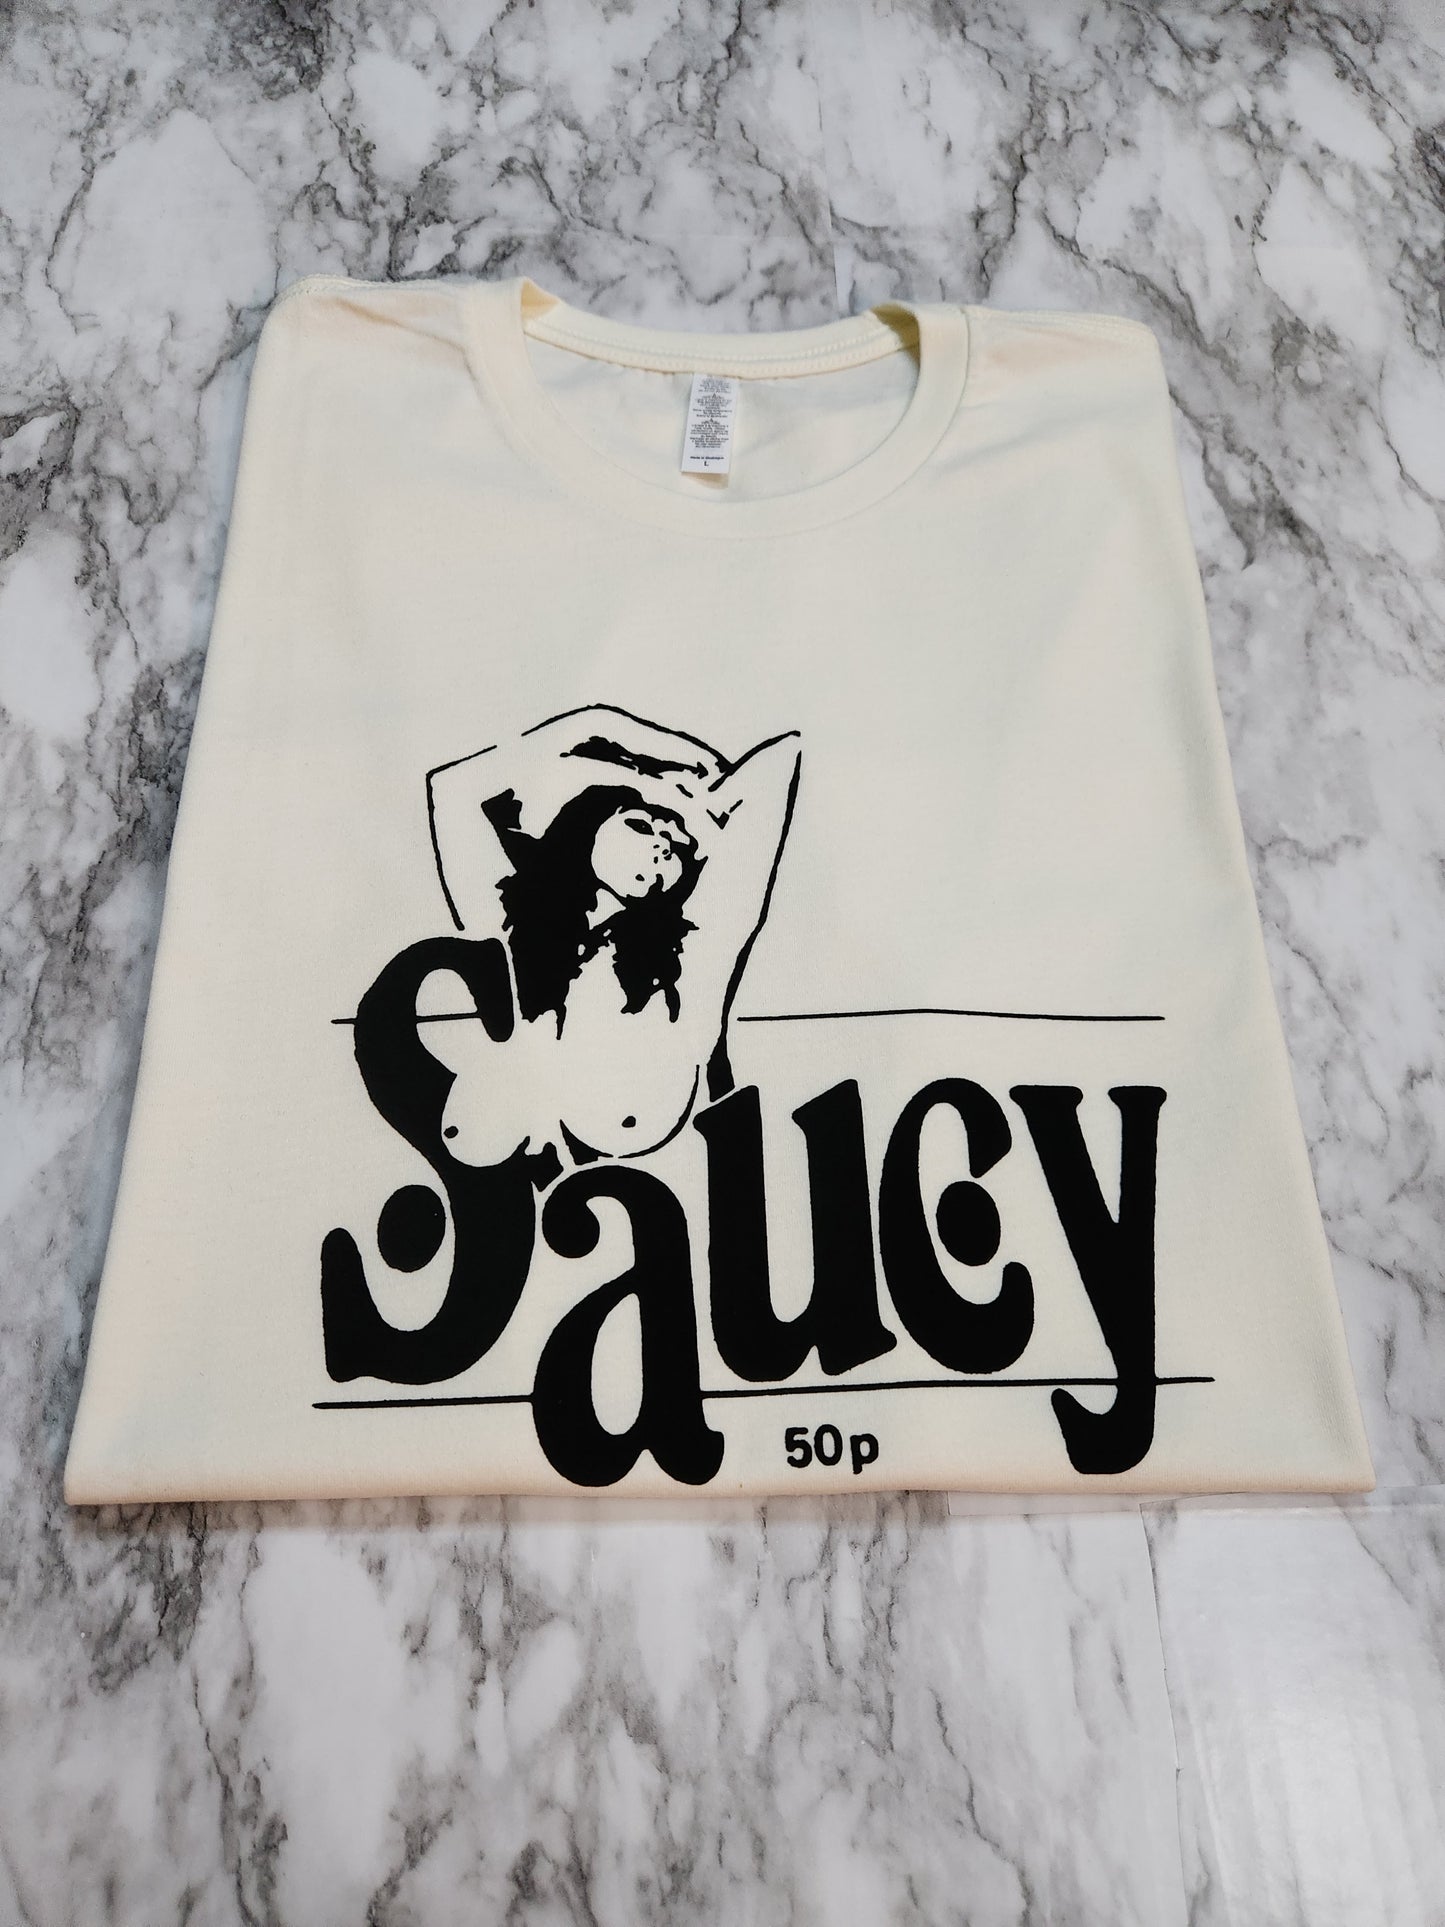 Saucy T-Shirt - Centre Ave Clothing Co.